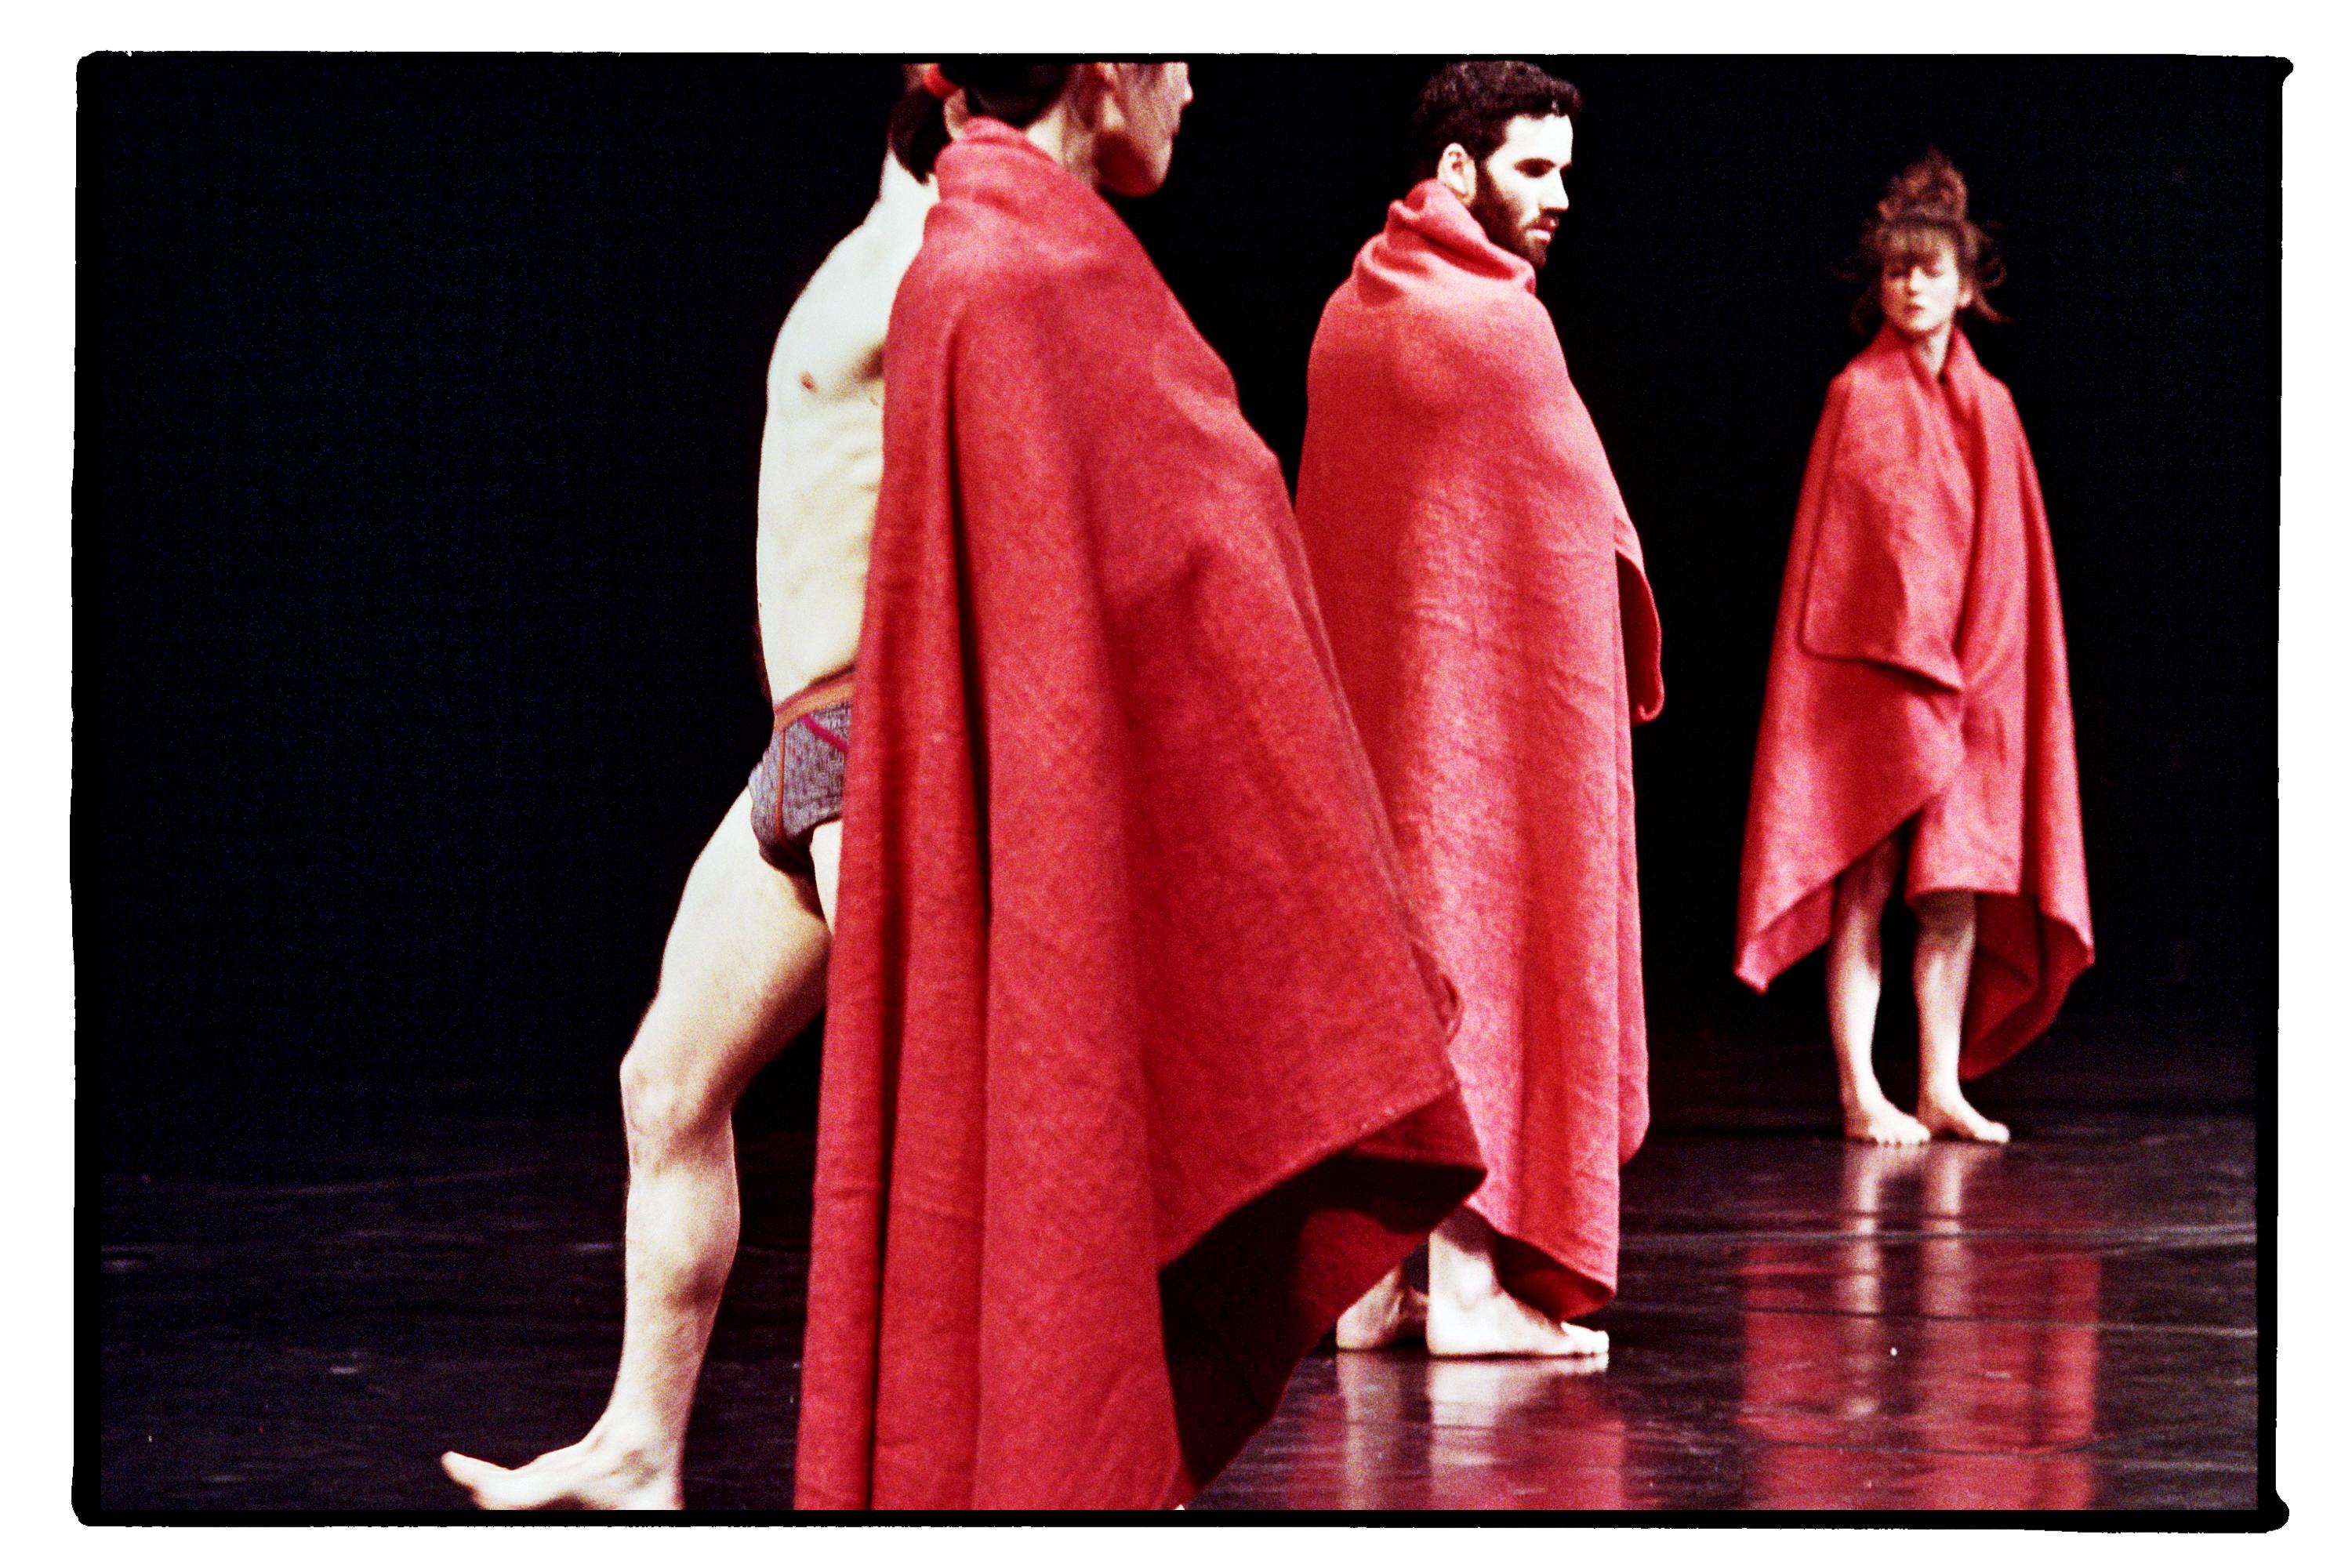 Four standing dancers, three clad in red blankets